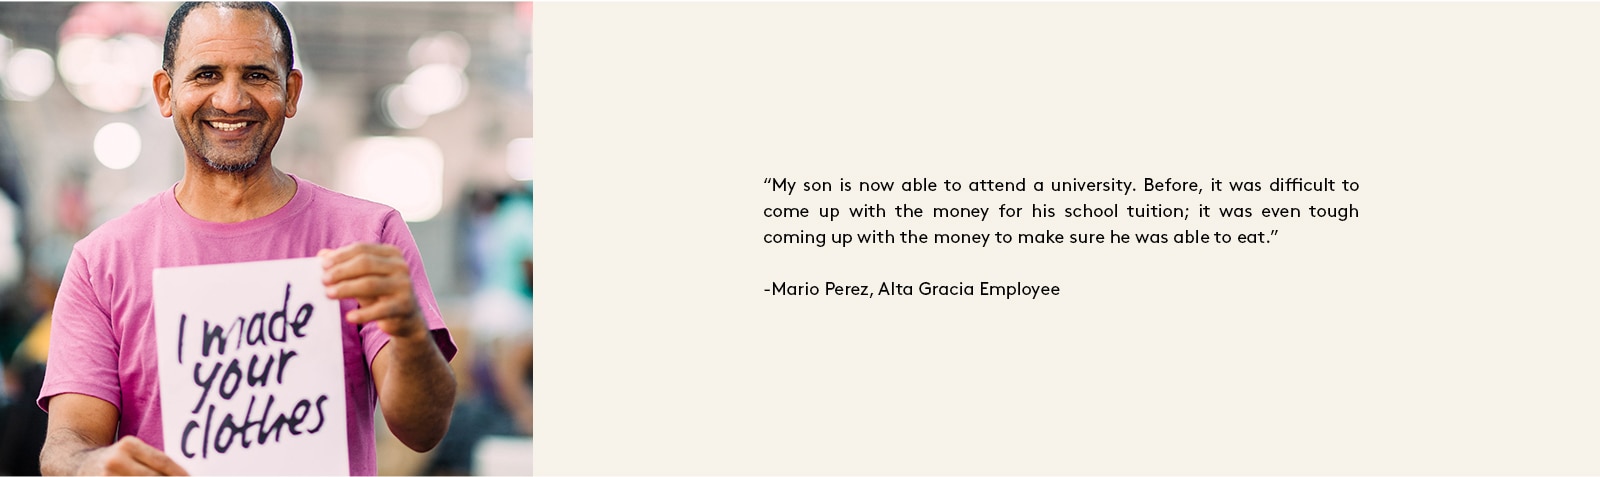 “My son is now able to attend a university. Before, it was difficult to come up with the money for his school tuition; it was even tough coming up with the money to make sure he was able to eat.” - Mario Perez, Alta Gracia Employee